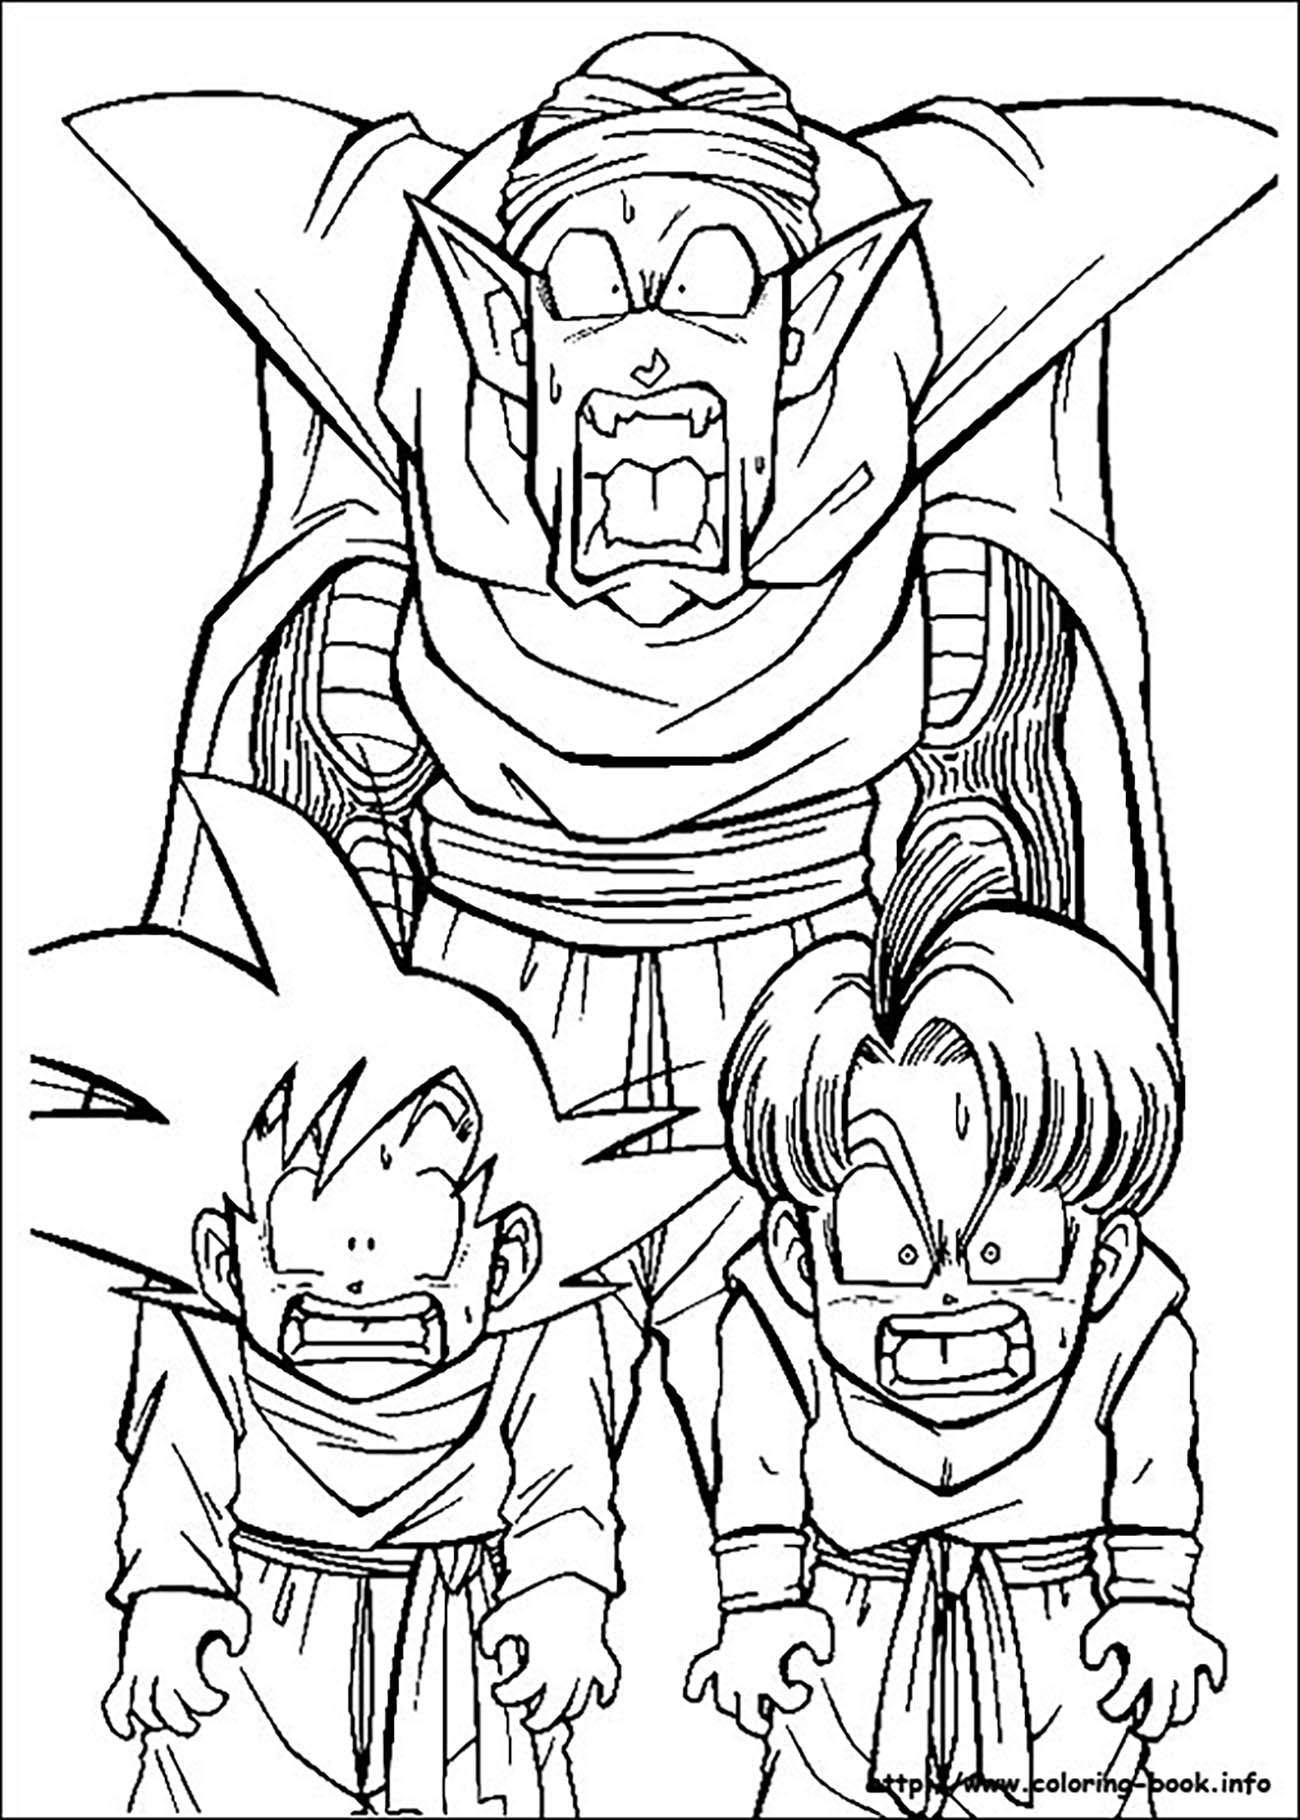 trunks coloring pages